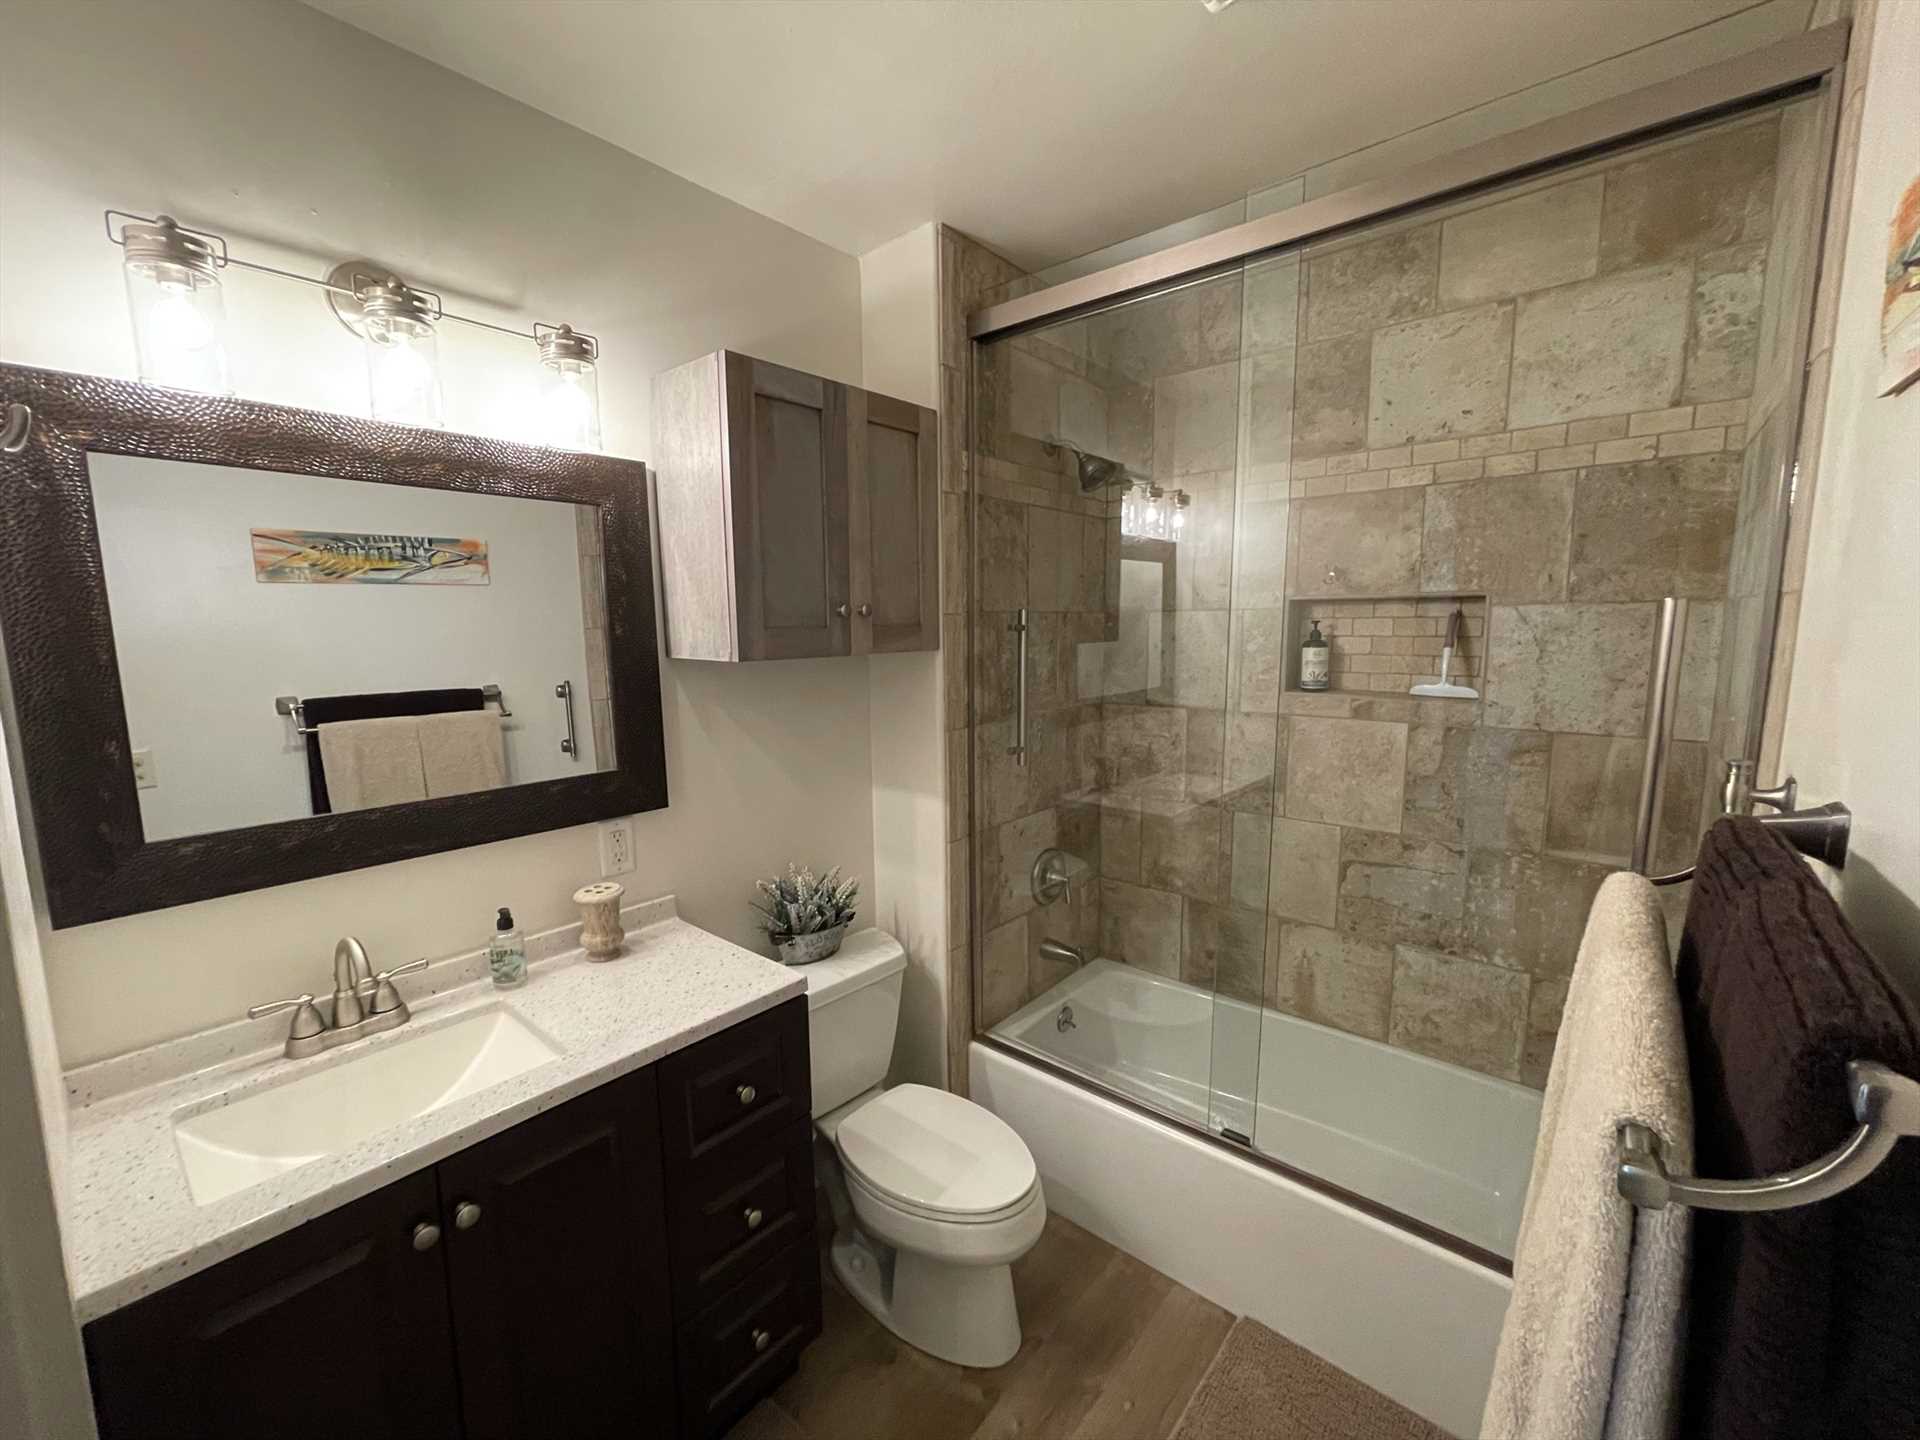                                                 With its huge tub and shower combo, stylish vanity, and stone highlights, the Star's full bath looks like something out of a model home!